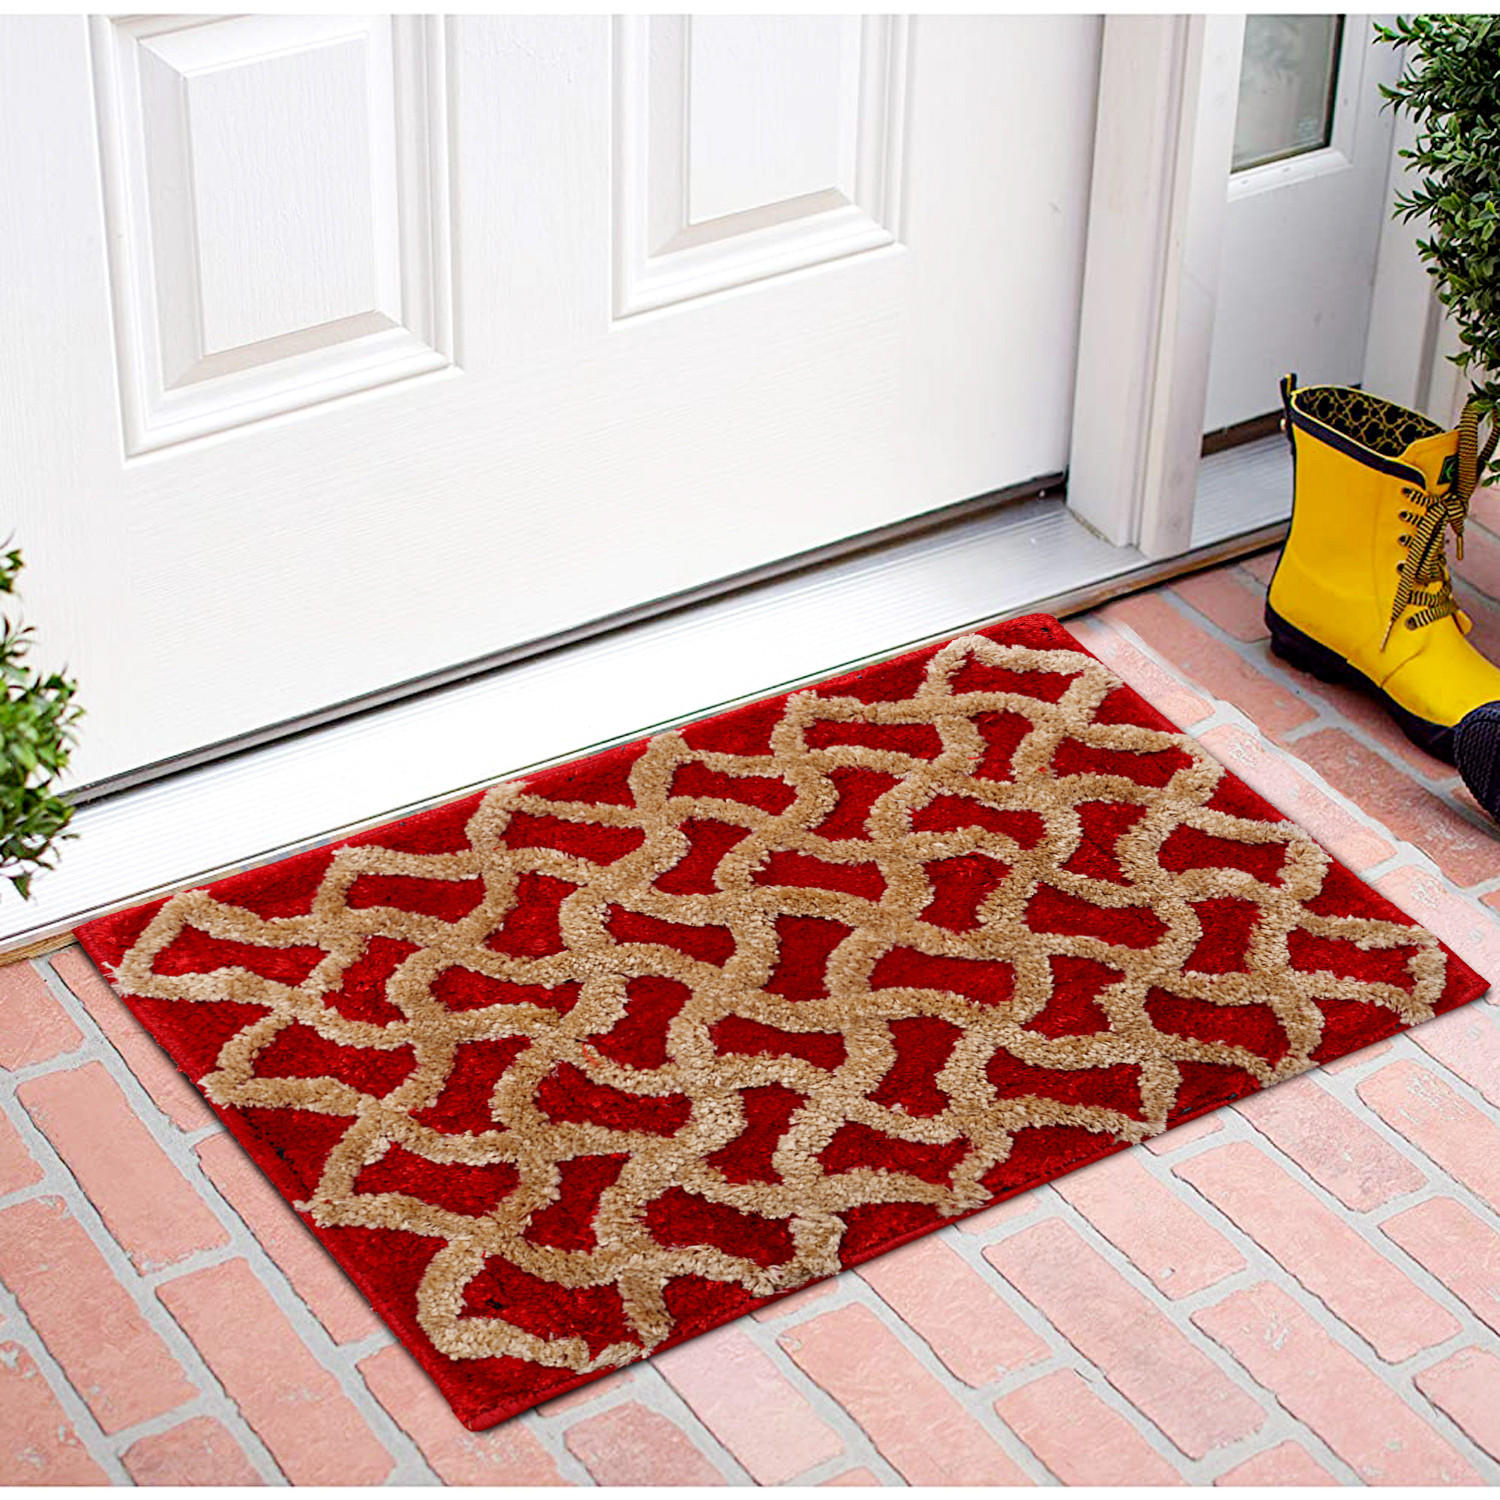 Kuber Industries Soft, lightweigth, Washable, Non Slip Doormat Entrance Rug Dirt Trapper Mat Shoes Scraper for Entry, Patio, Porch (Red)